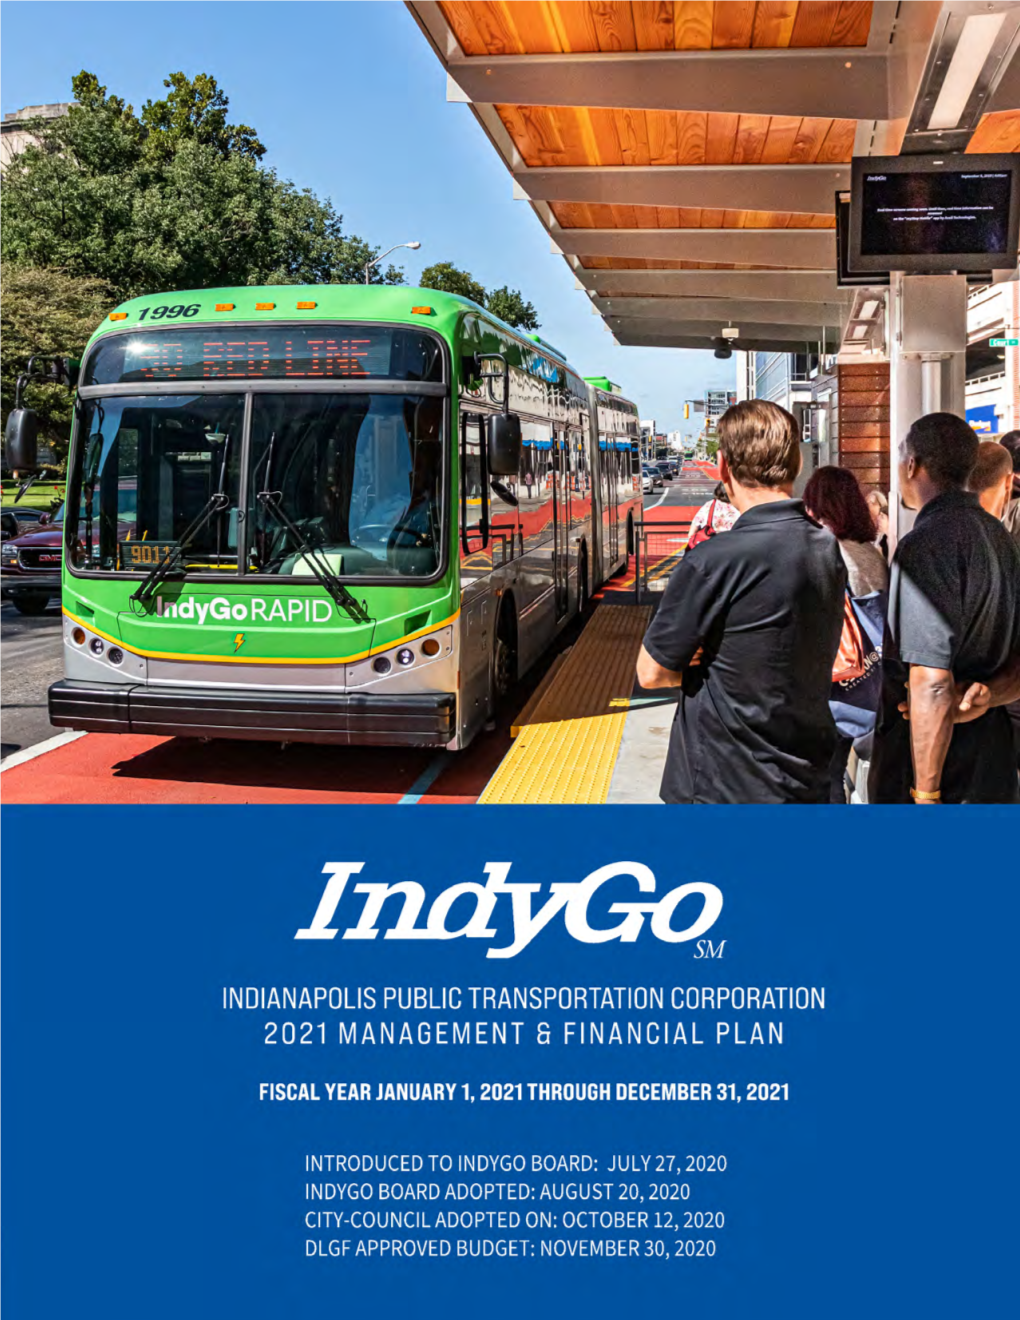 The 2021 Indygo Budget Book